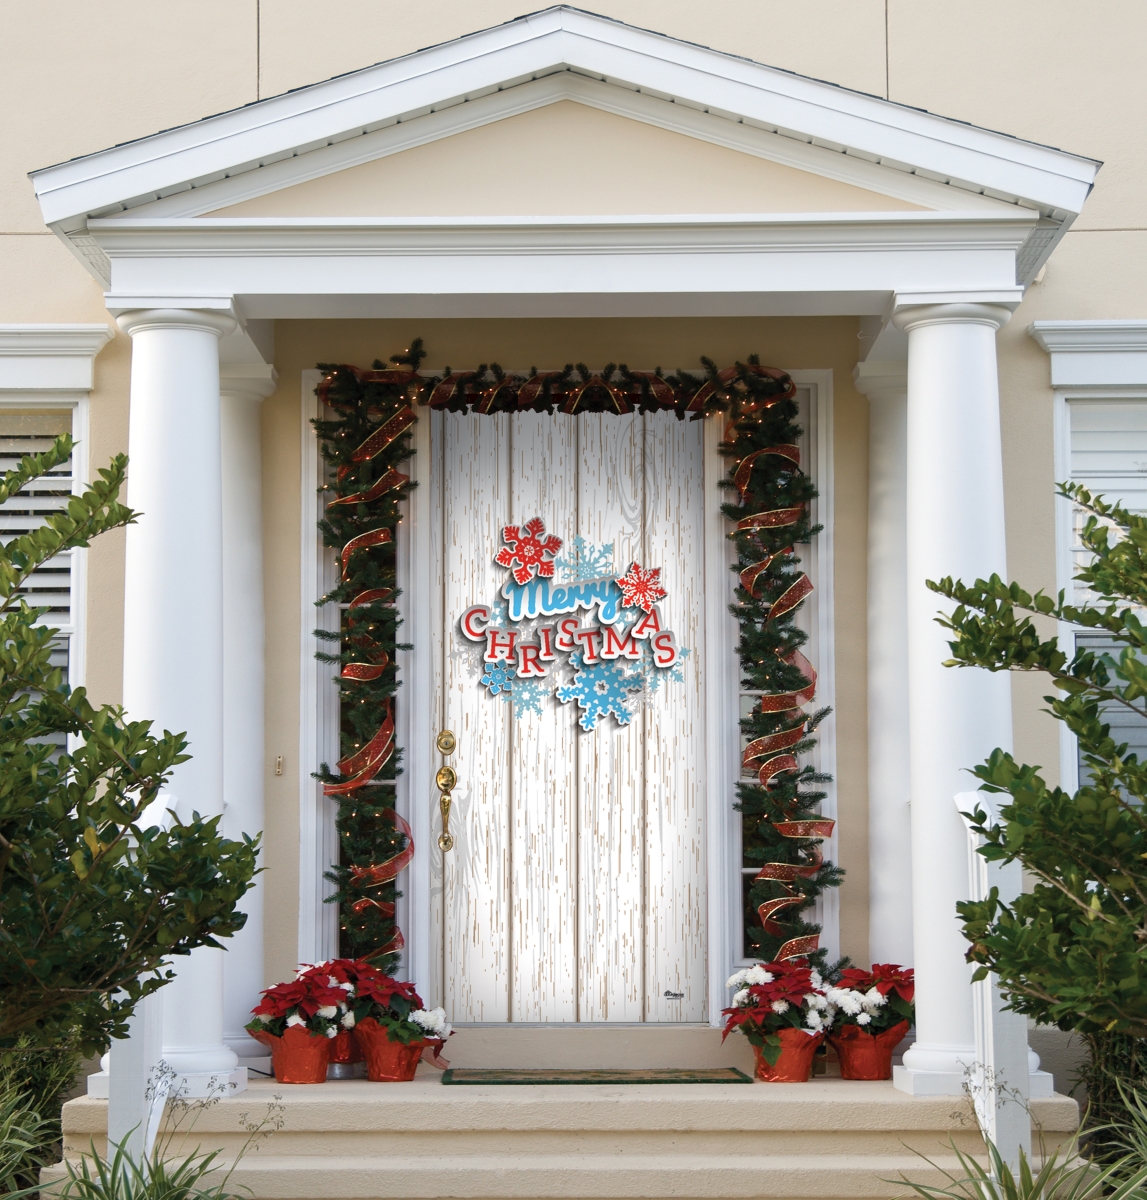 285906xmas-003 36 X 80 In. Christmas Wreath Christmas Front Door Mural Sign Banner Decor, Multi Color